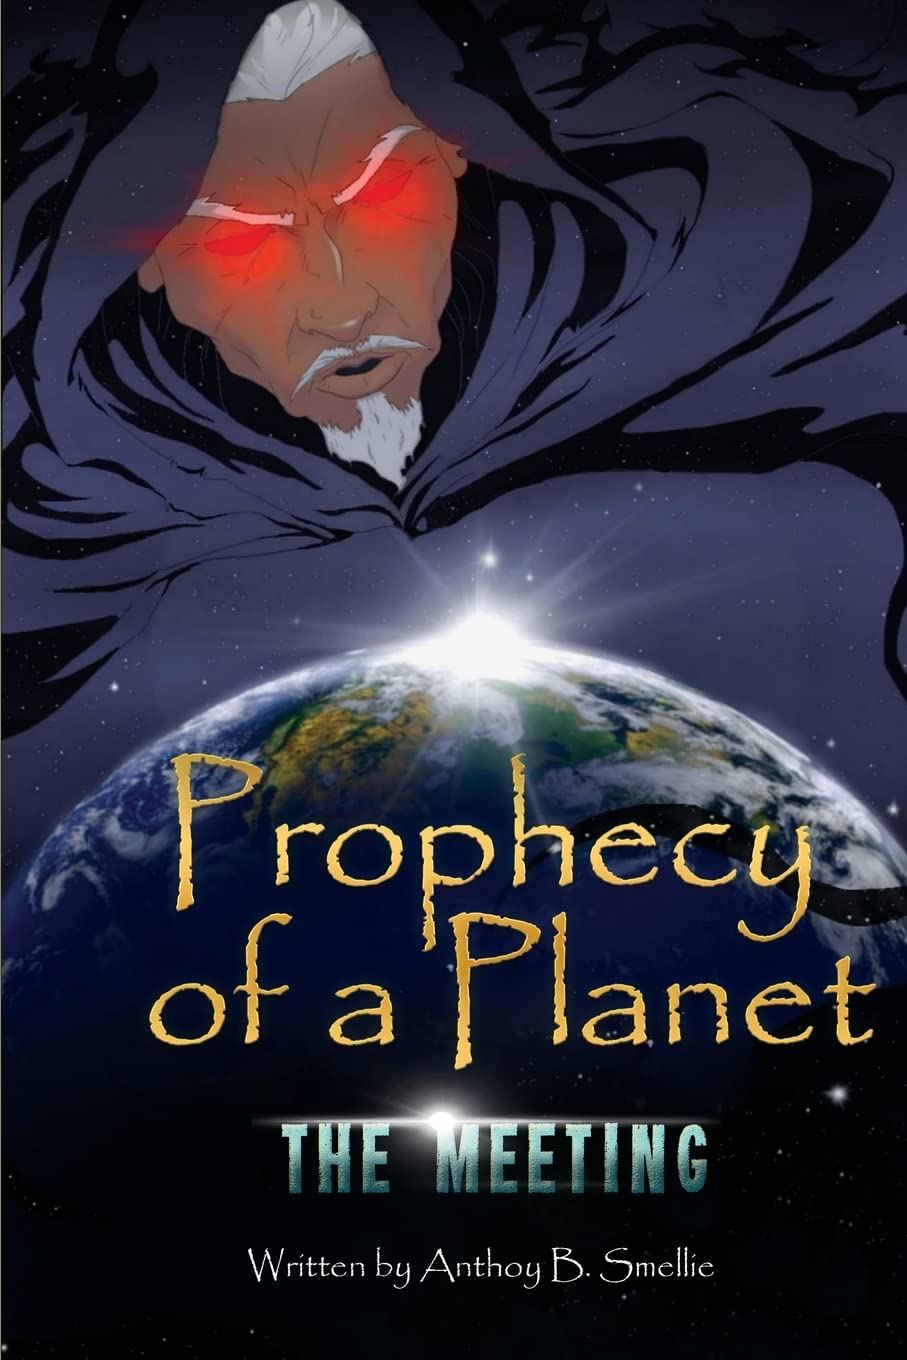 Author’s Tranquility Press Supports Anthony B. Smellie’s, The Prophecy of a Planet: The Meeting 15